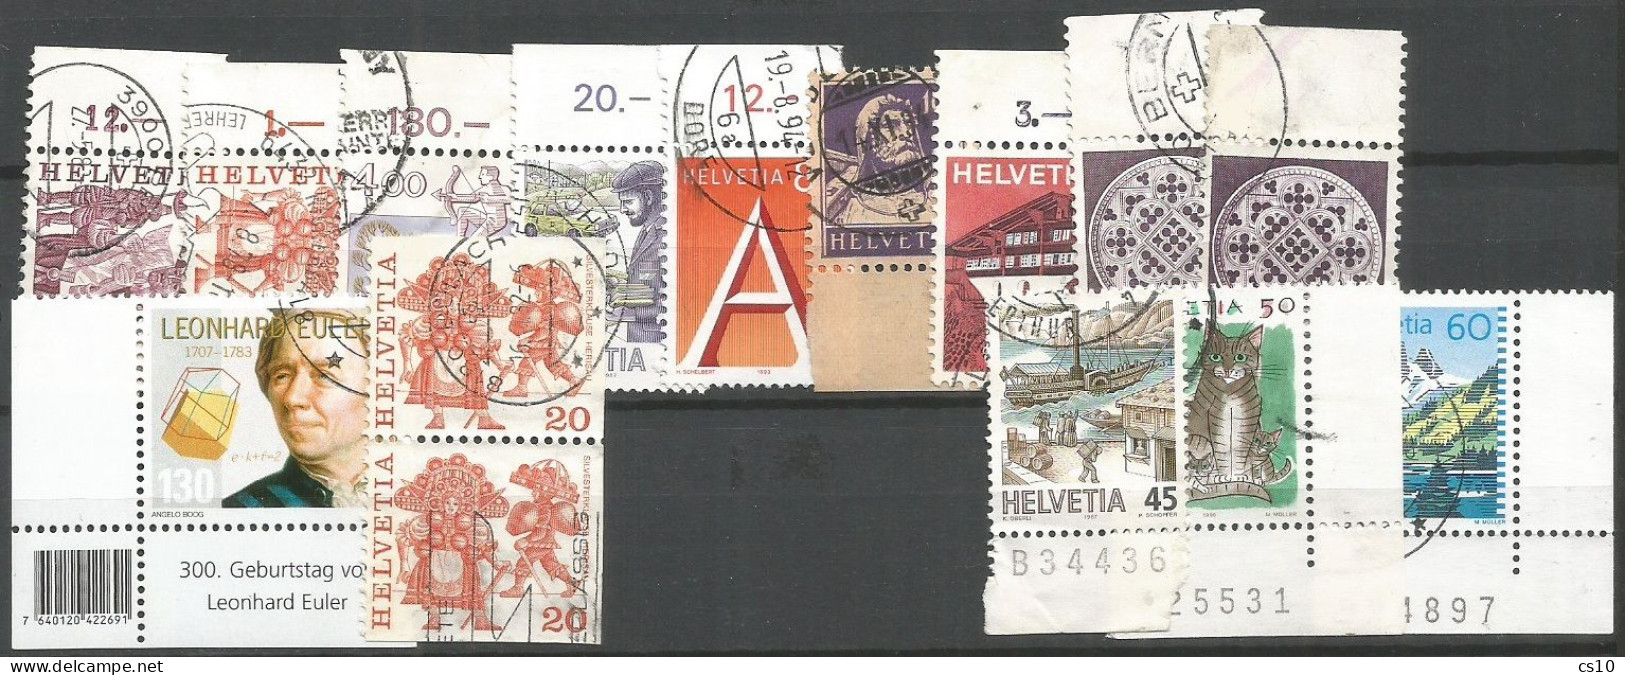 SUISSE scarce 12 scans lot with NON Issued SION 2006 Winter Olympics + Frama Atm Stamps Labels Tete-Beche P.Due Variety